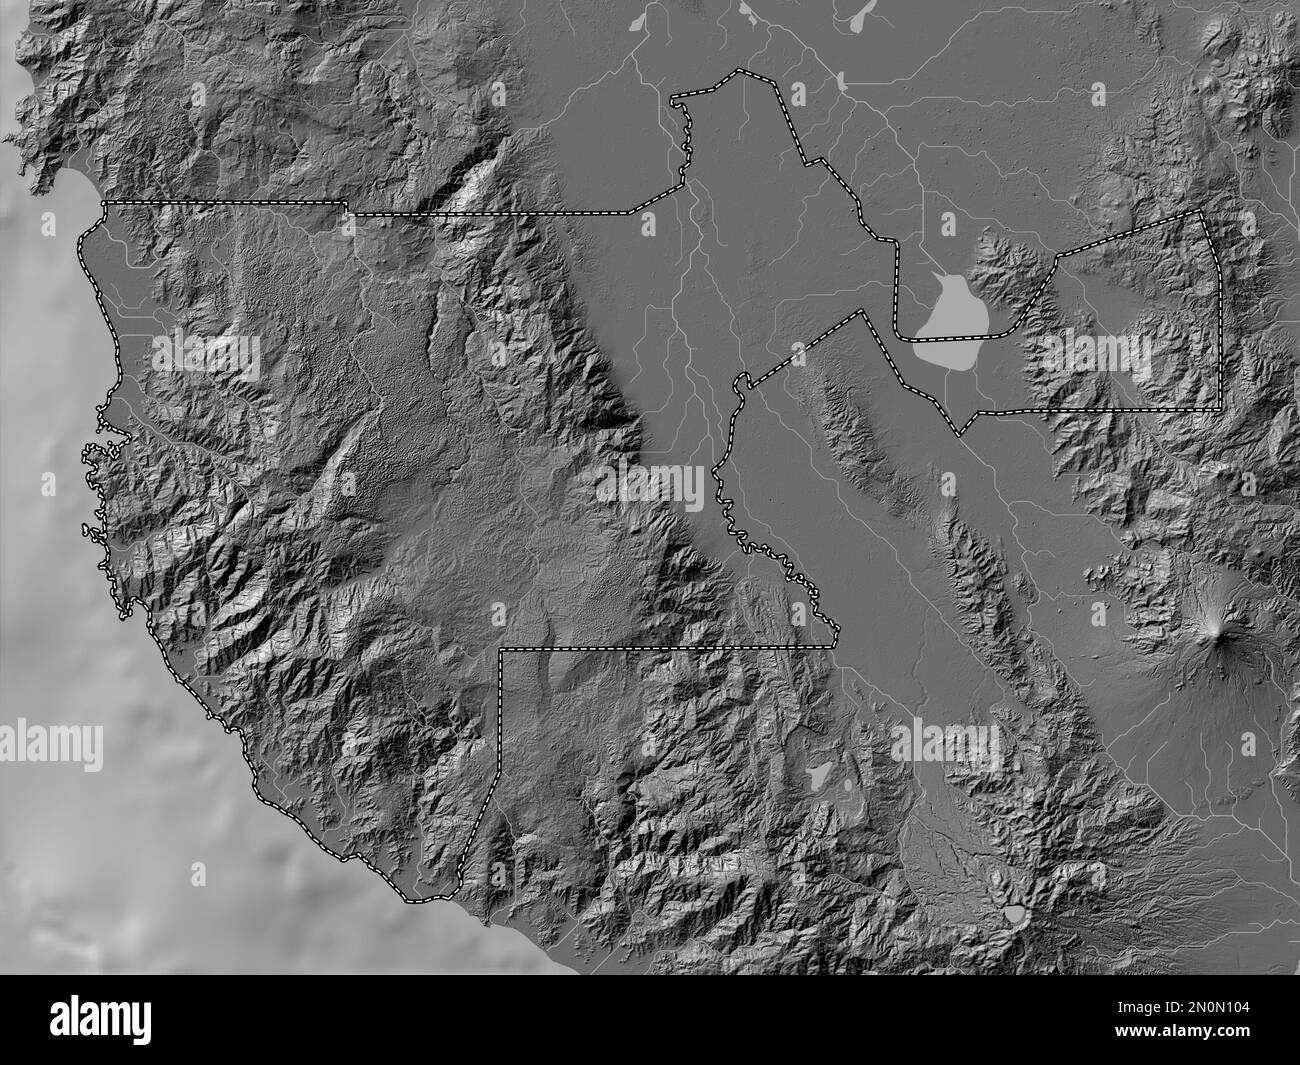 Sultan Kudarat, province of Philippines. Bilevel elevation map with lakes and rivers Stock Photo